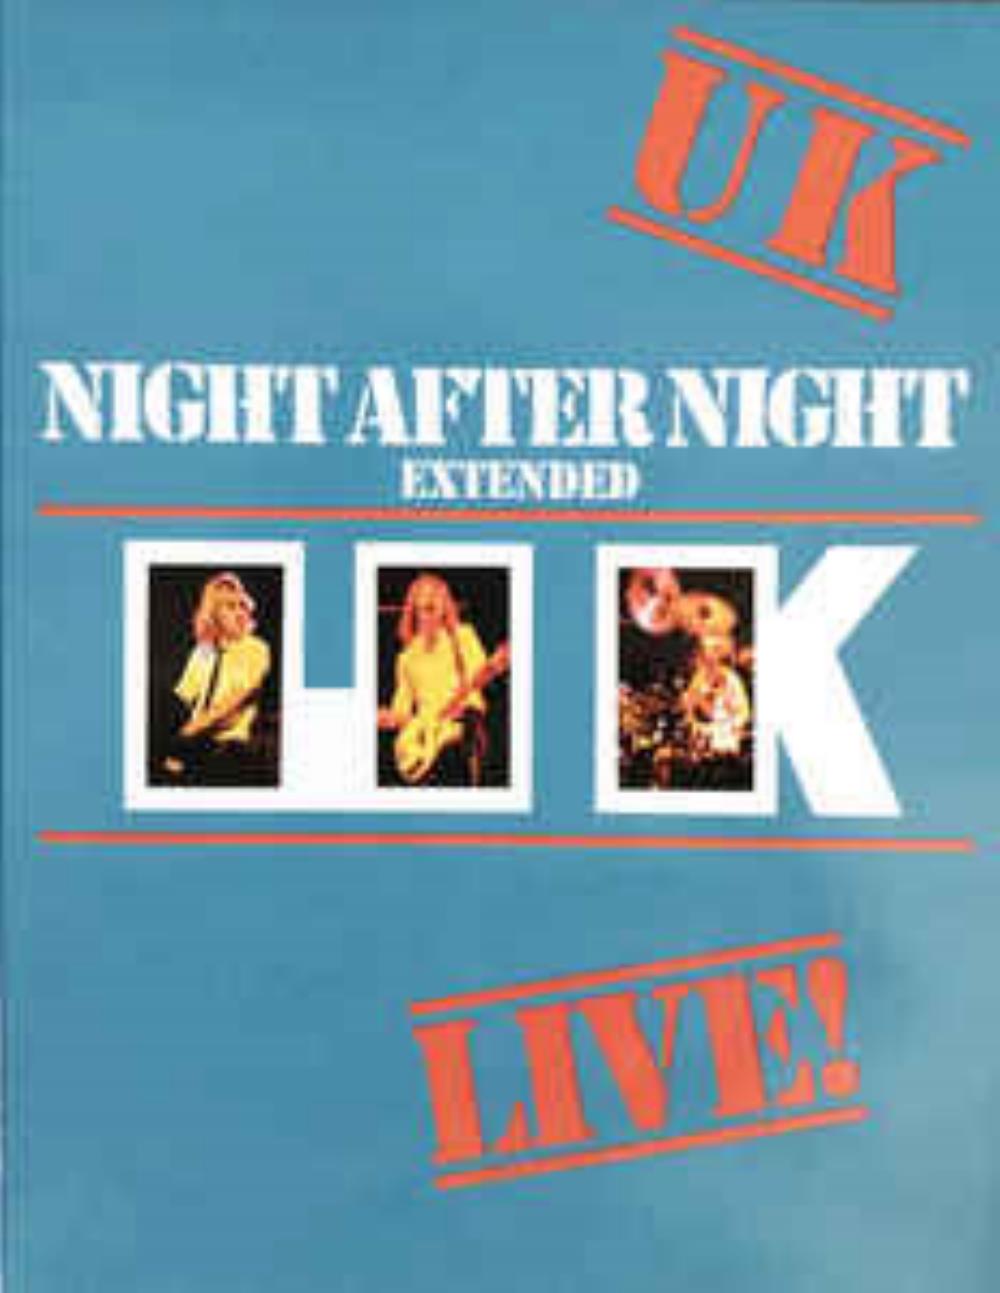 UK - Night After Night Extended CD (album) cover